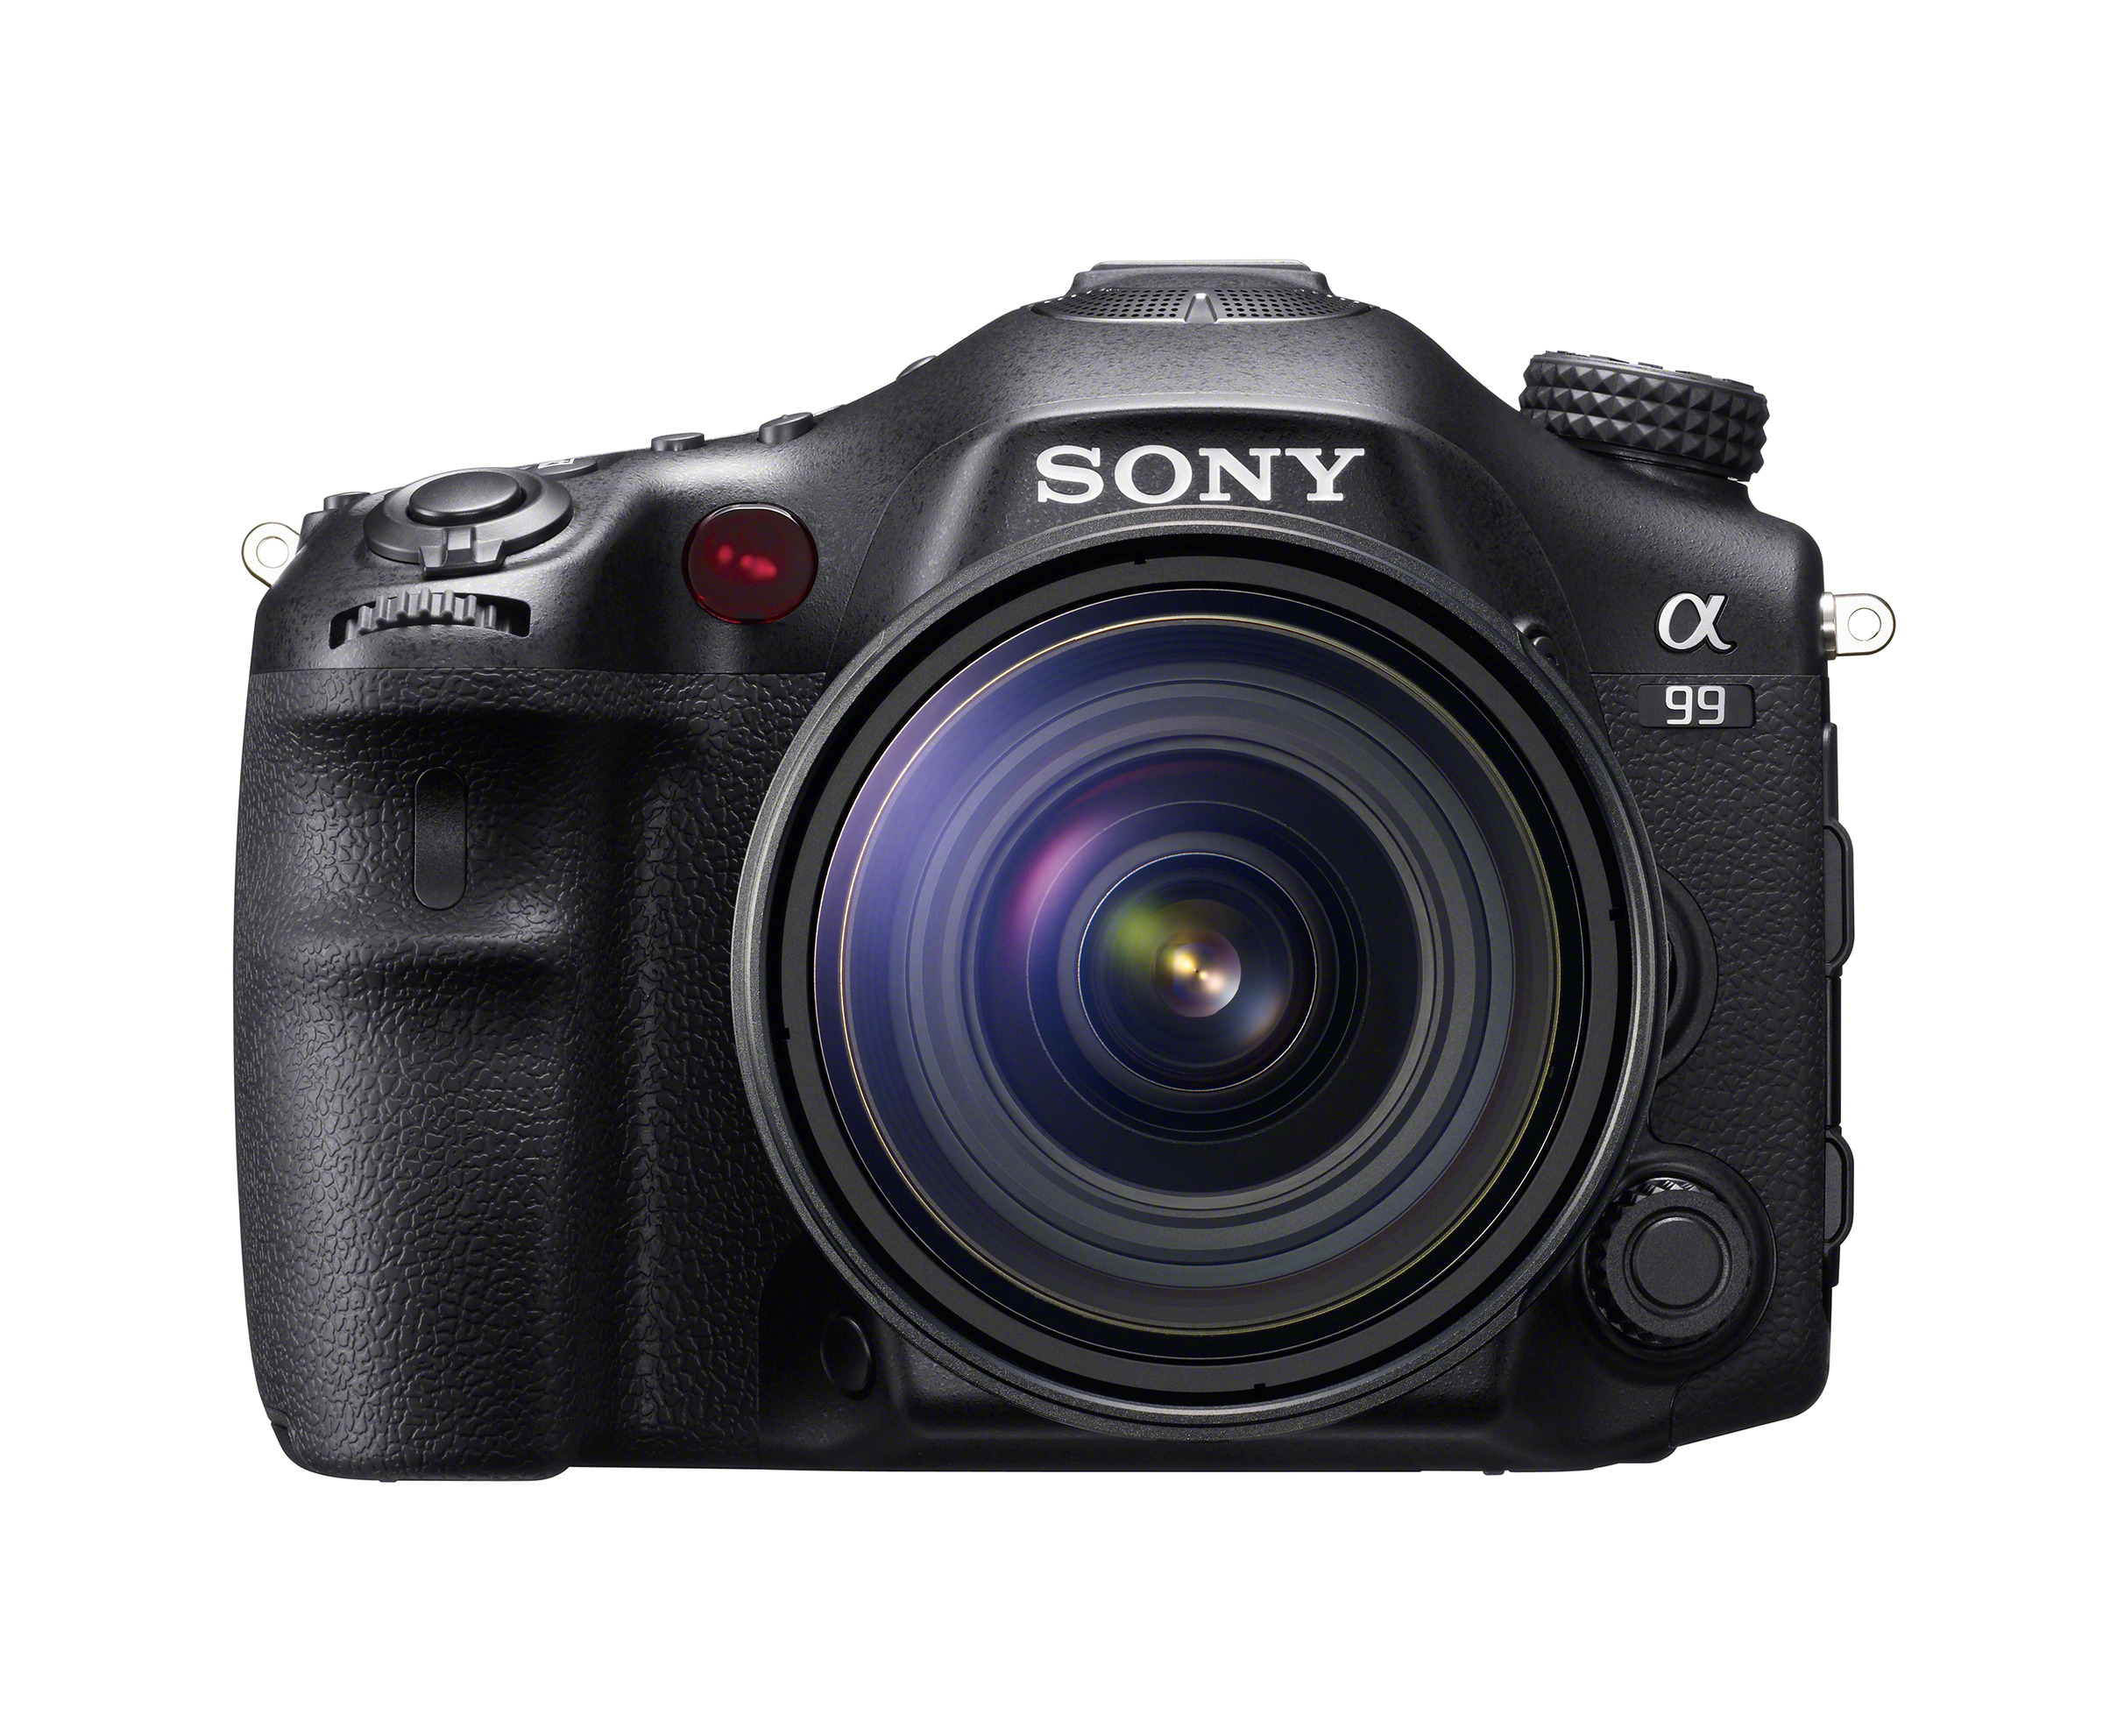 The best of the Sony range